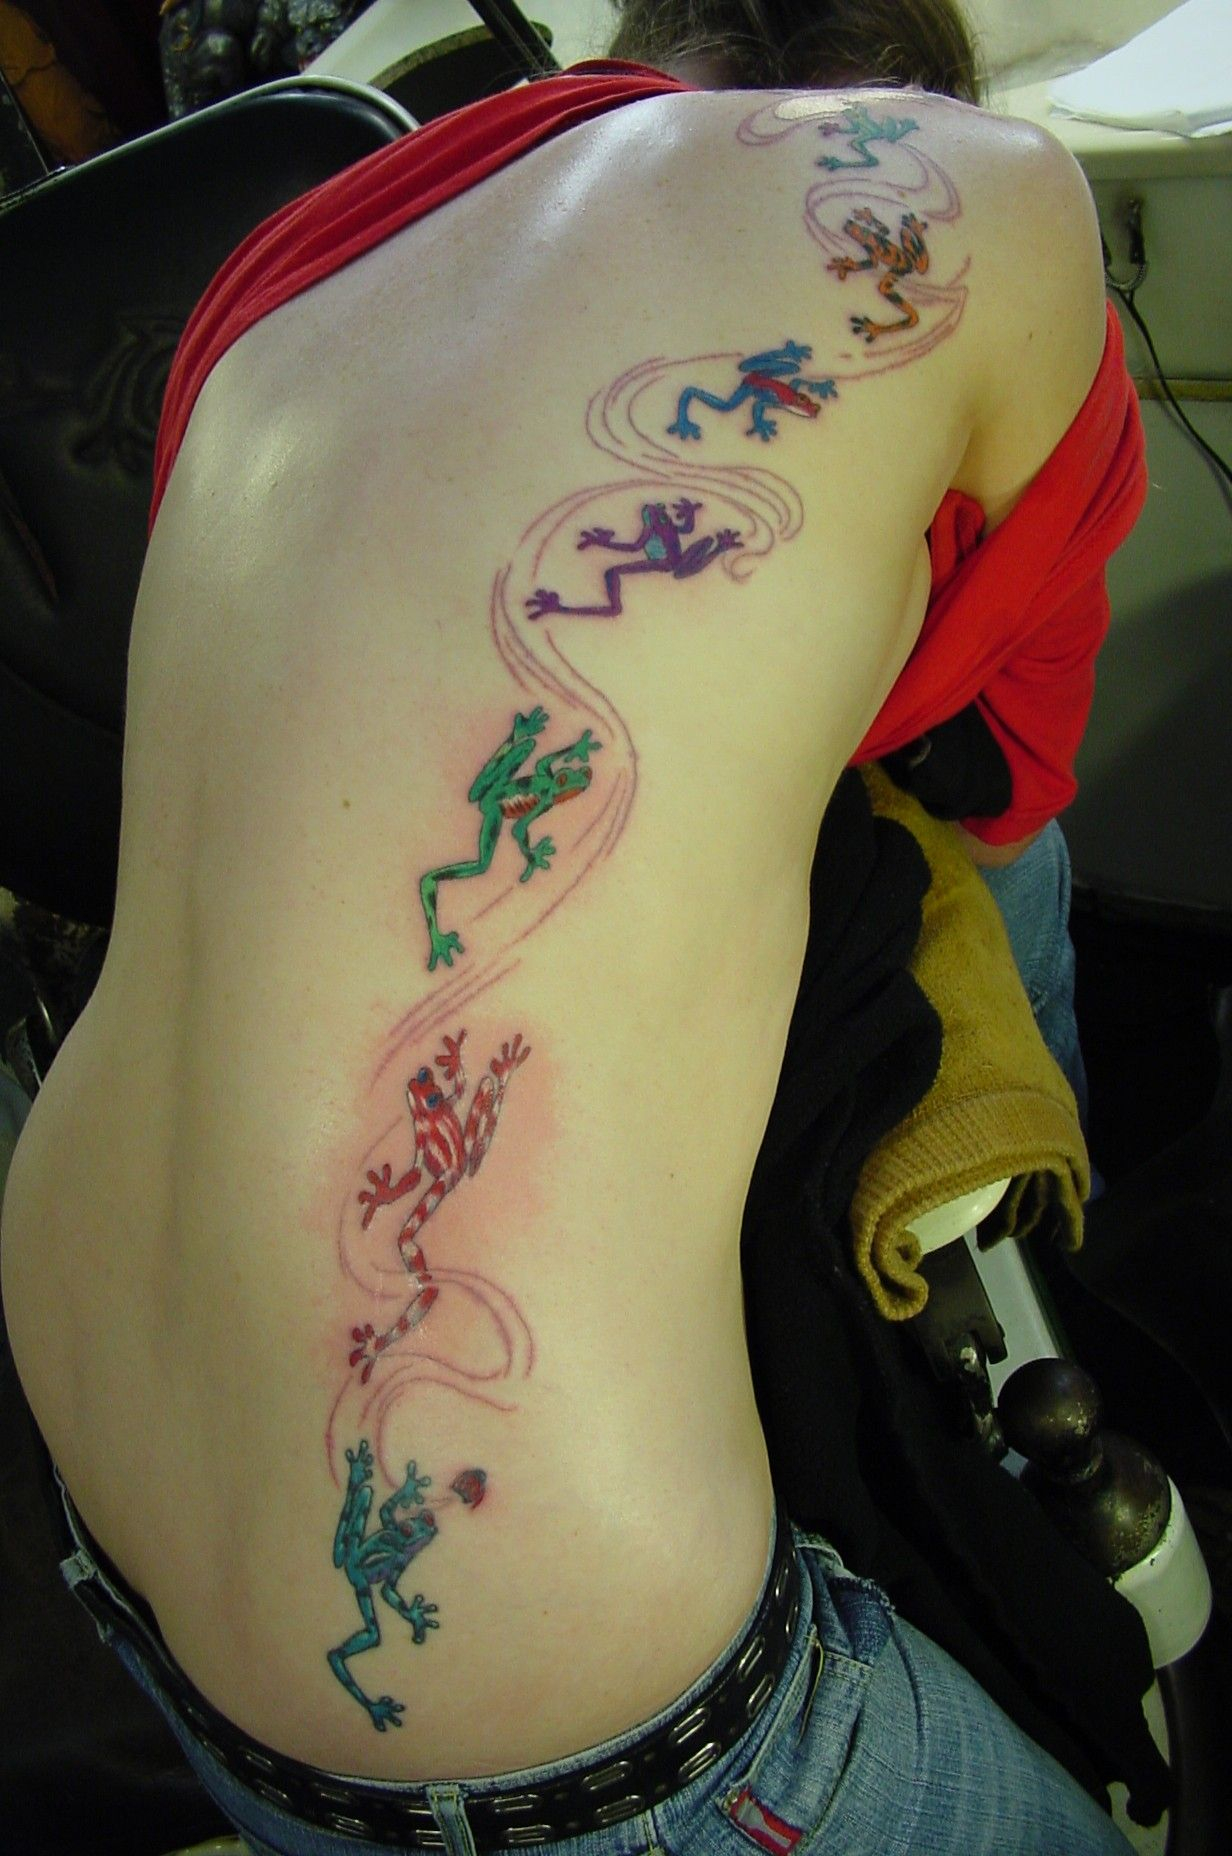 30 Stunning Frog Tattoos Ideas For Men And Women Tatto Frog inside measurements 1232 X 1856